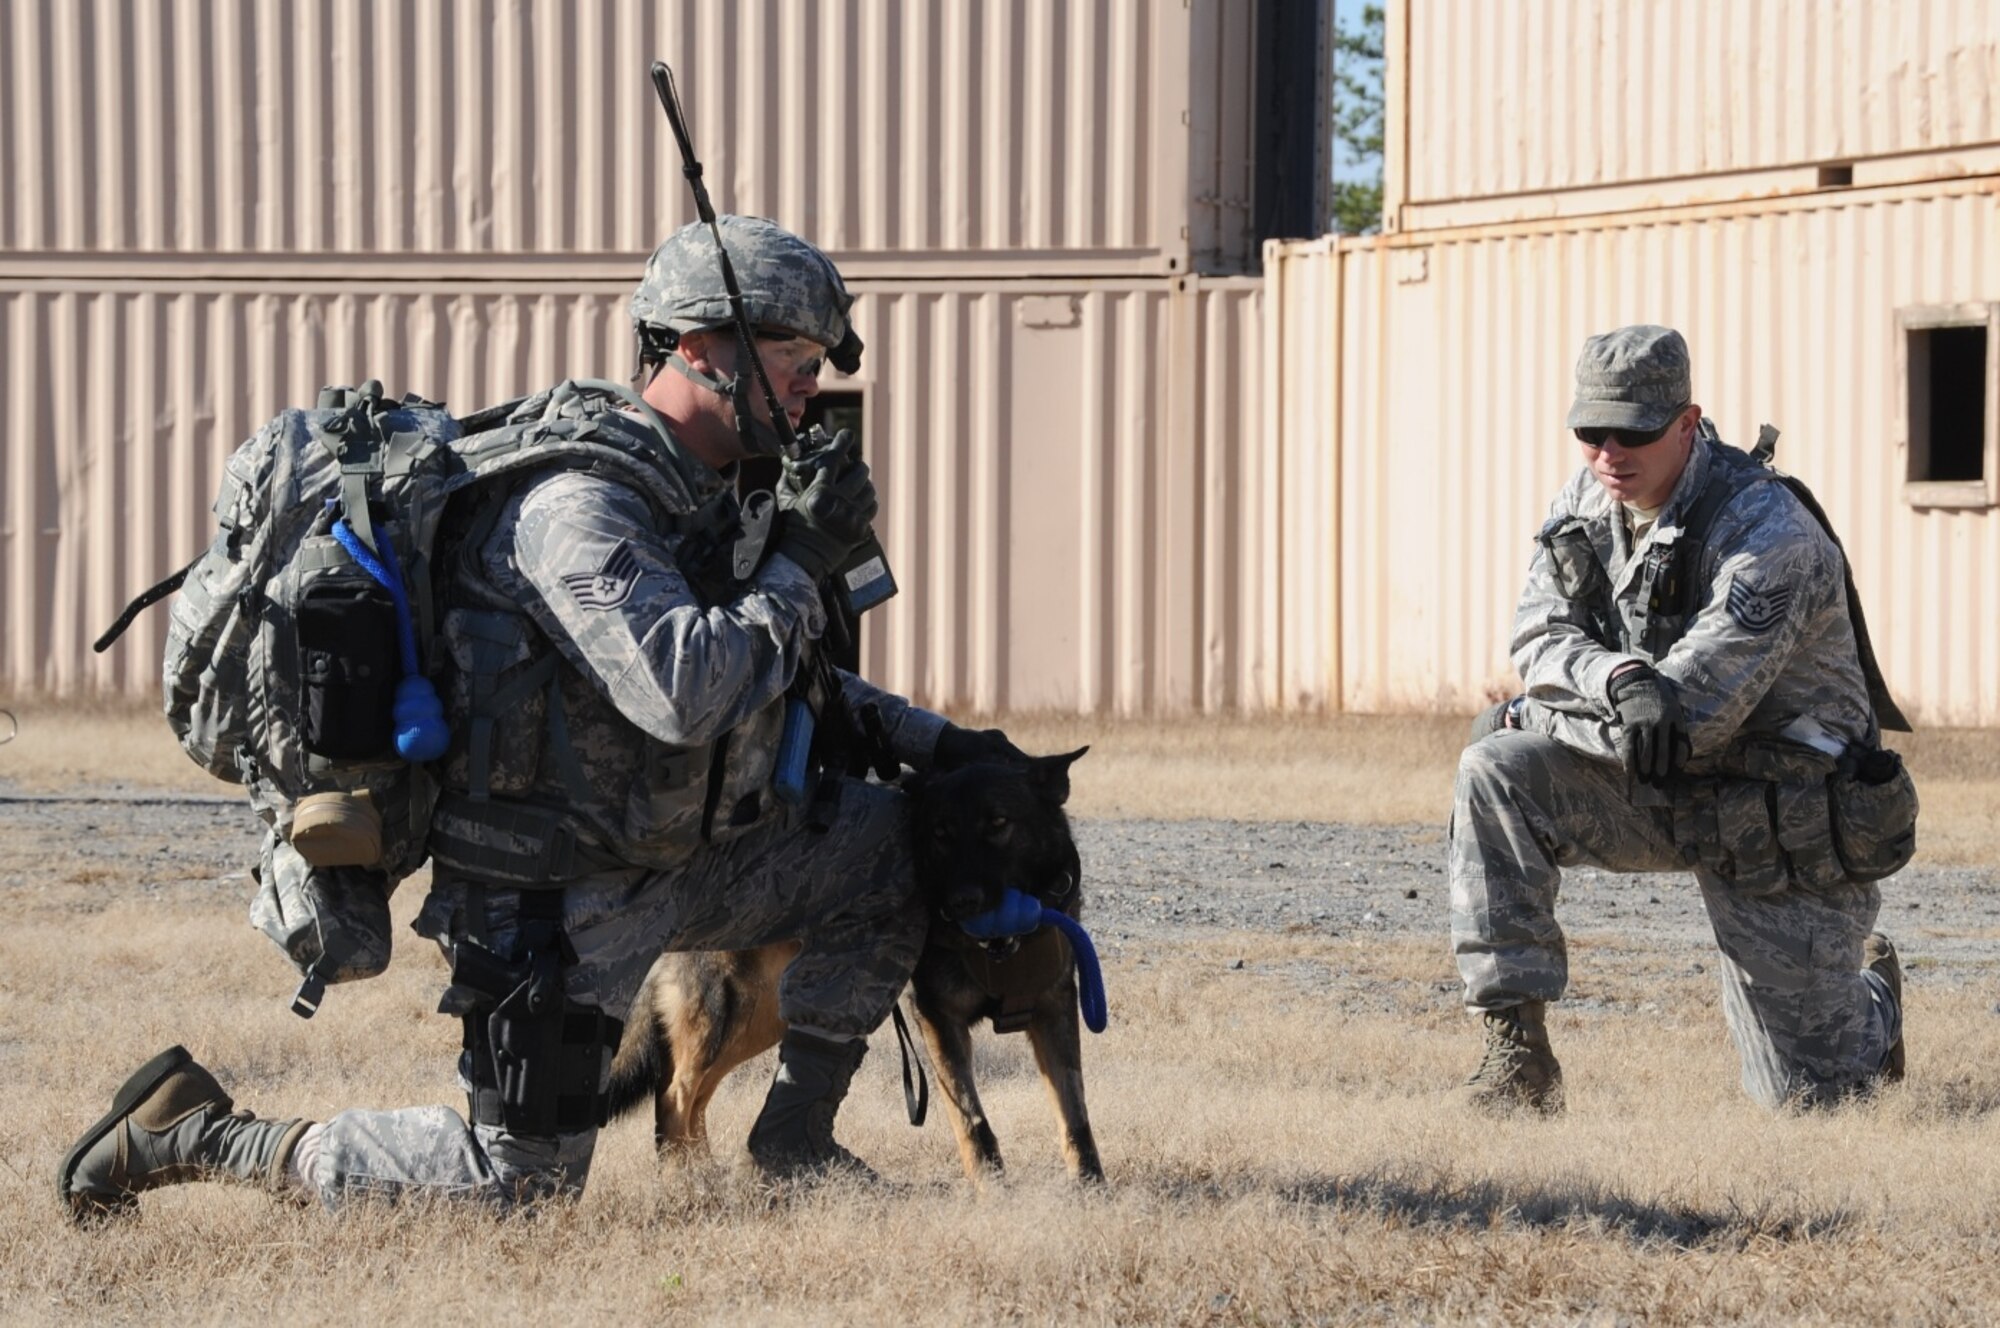 Staff Sgt. Brandon Serena, military working dog handler from Patrick Air Force Base, Fla., calls in a 9-Line improvised explosive device report with Rocky, a MWD, at his side while Tech. Sgt. Matthew Lee, 421st Combat Training Squadron MWD cadre, observes the exercise during the MWD Base Security Operations Course Nov. 10, 2013, at Joint Base McGuire-Dix-Lakehurst, N.J.  (U.S. Air Force photo by Staff Sgt. Nathaniel Bevier/Released)